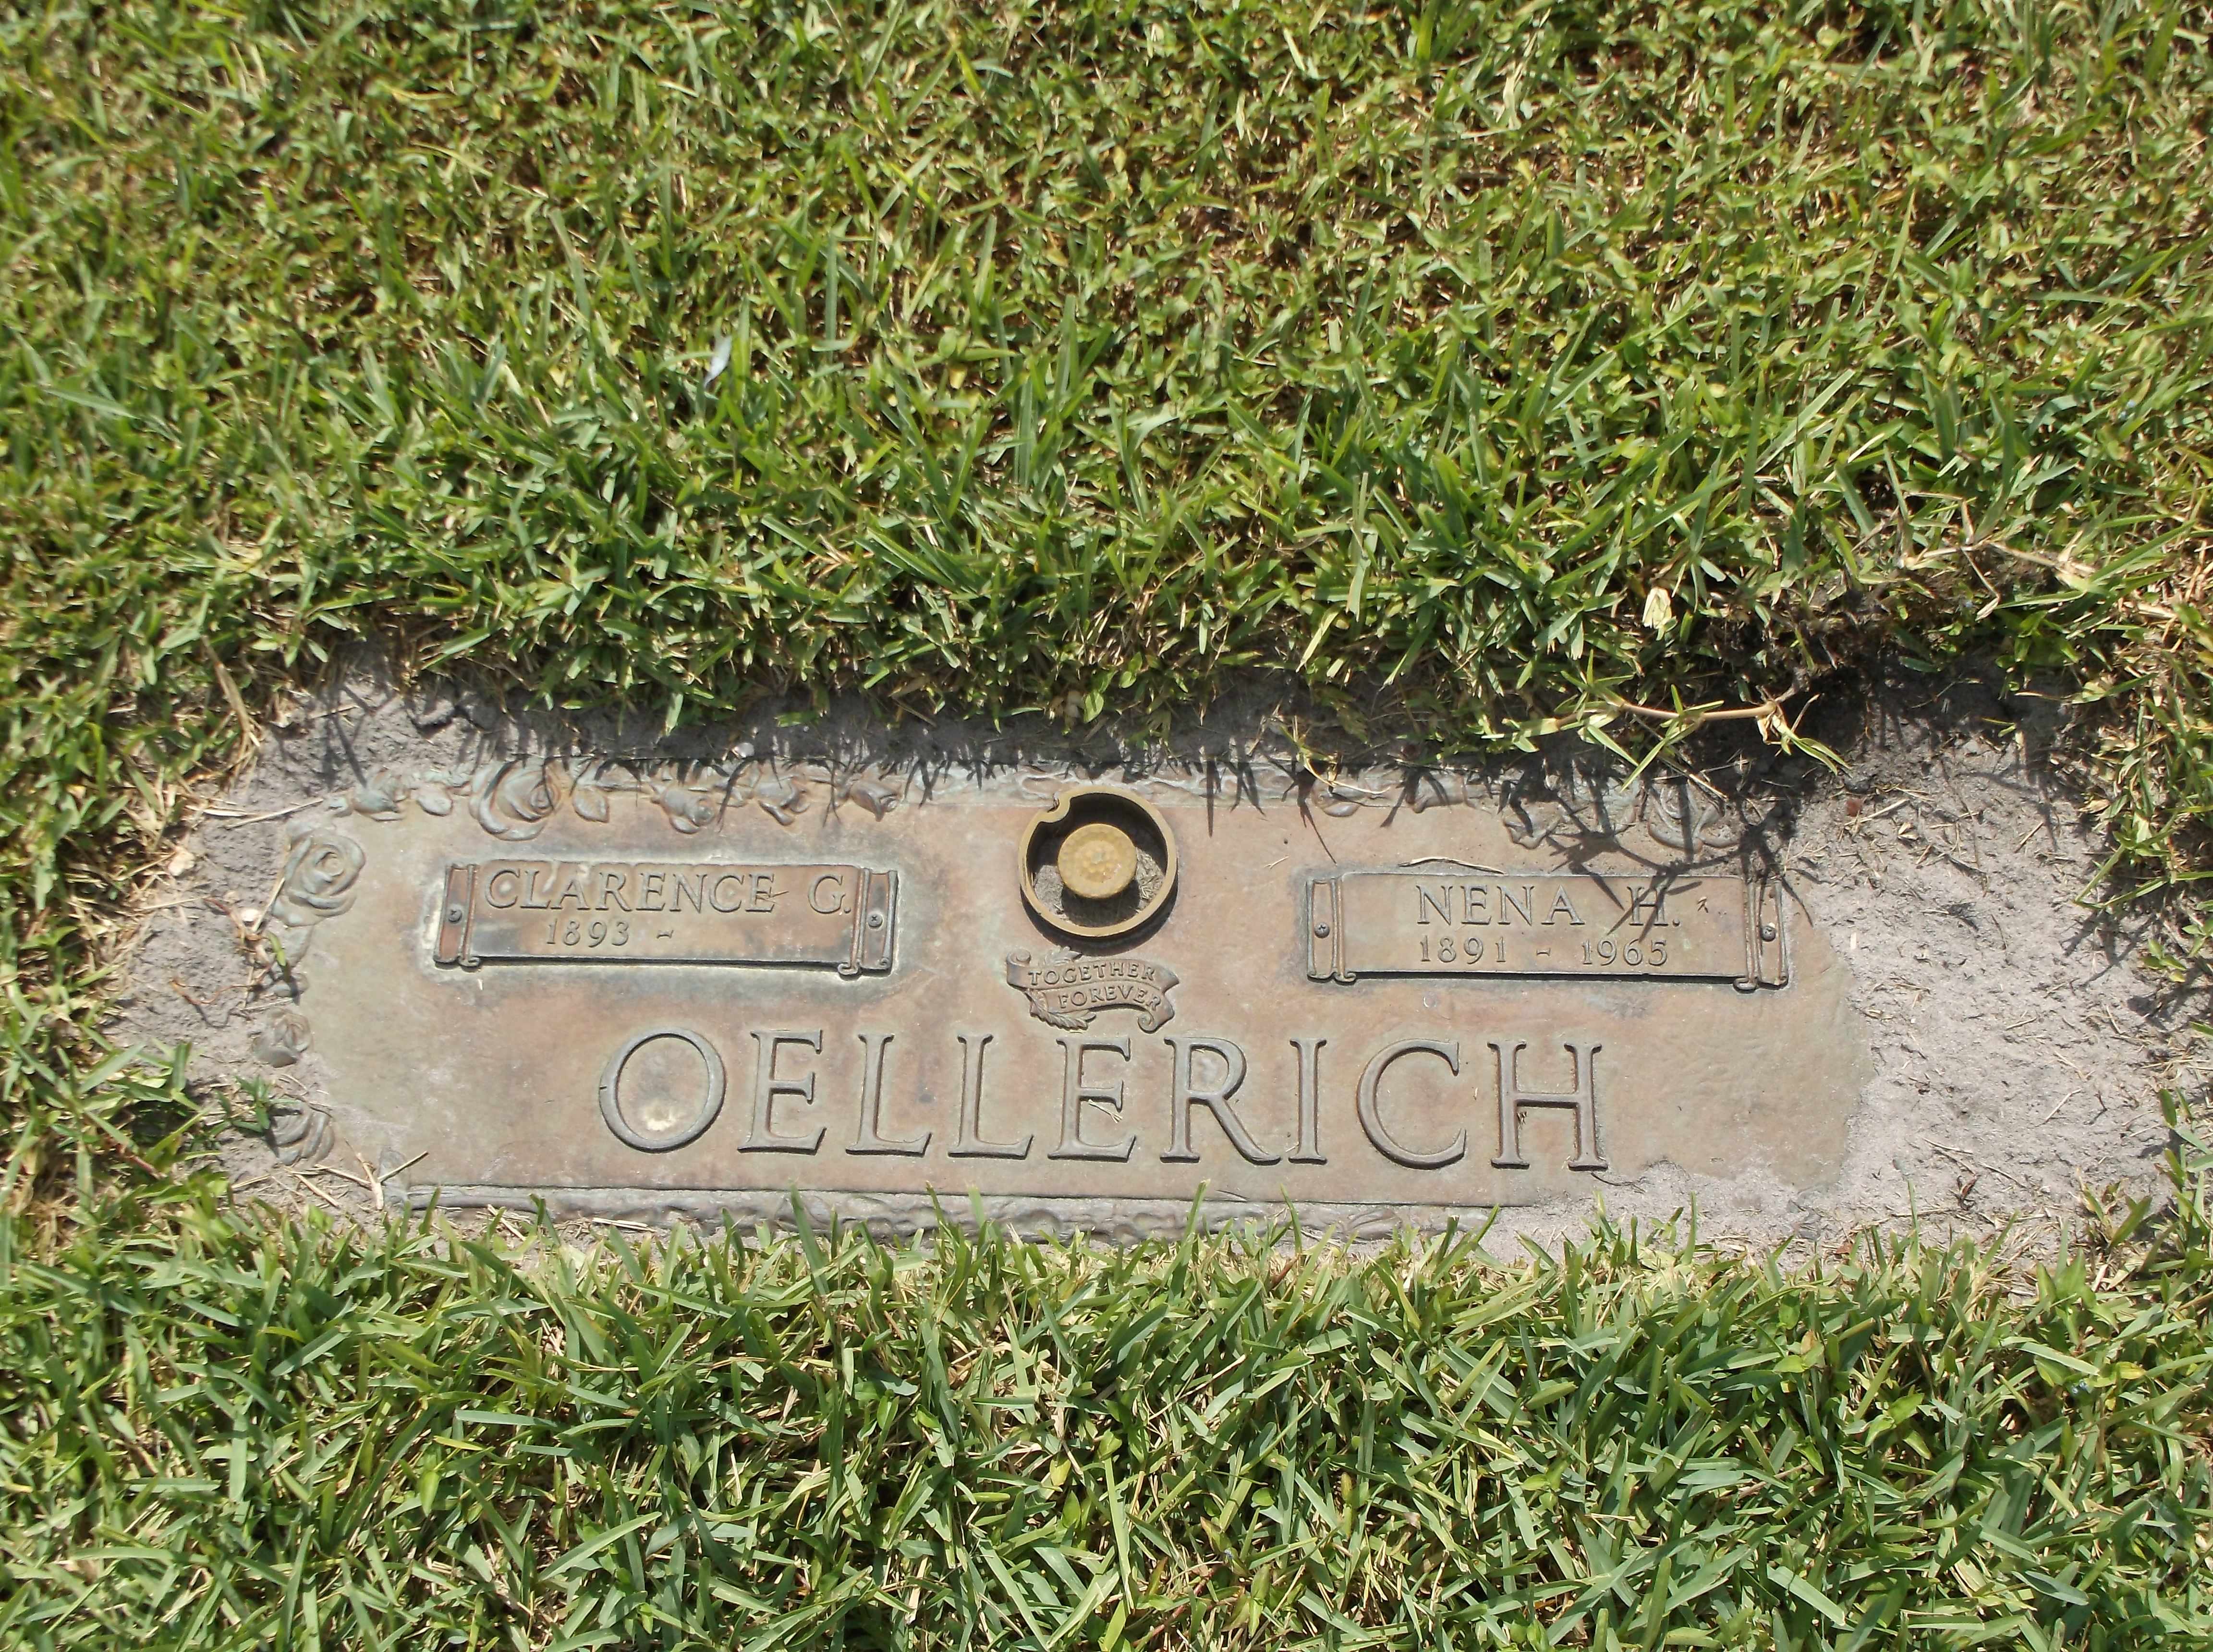 Clarence G Oellerich